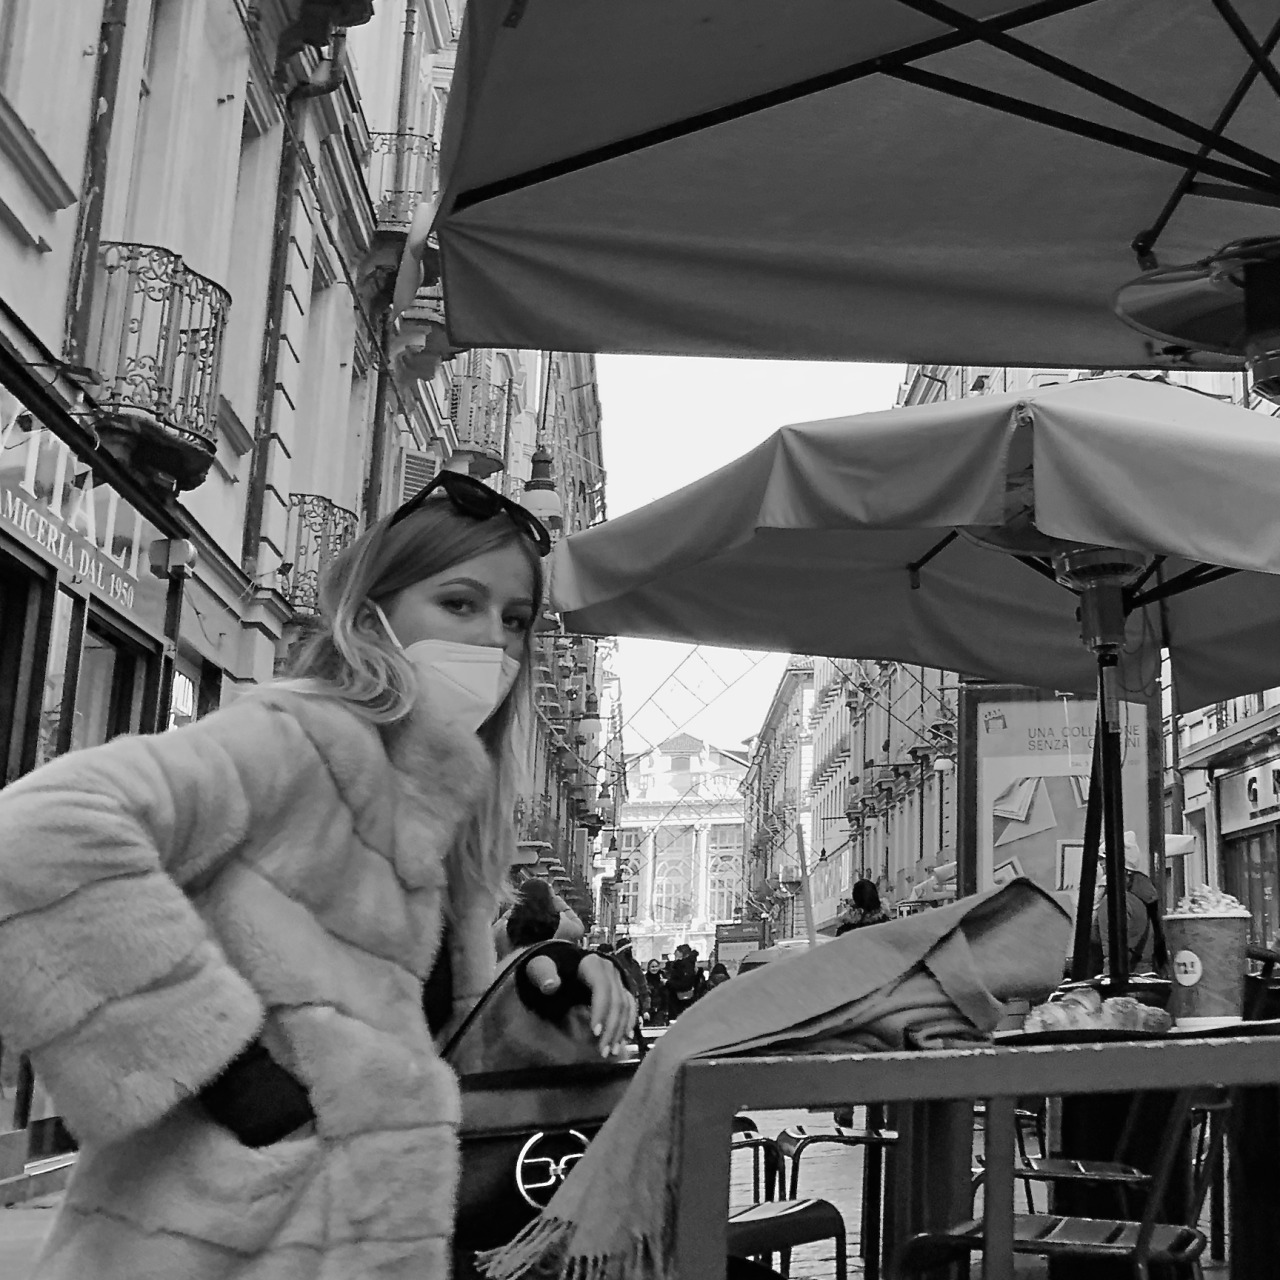 Urban exploration (in the time of coronavirus), Street Coffee Shop, Torino, ItalyCopyright @aliaslittlewilliam #street photography#street portrait #black and white #photography #photographers on tumblr #lensculture#lens#coffee shop#bnw#bw#italy